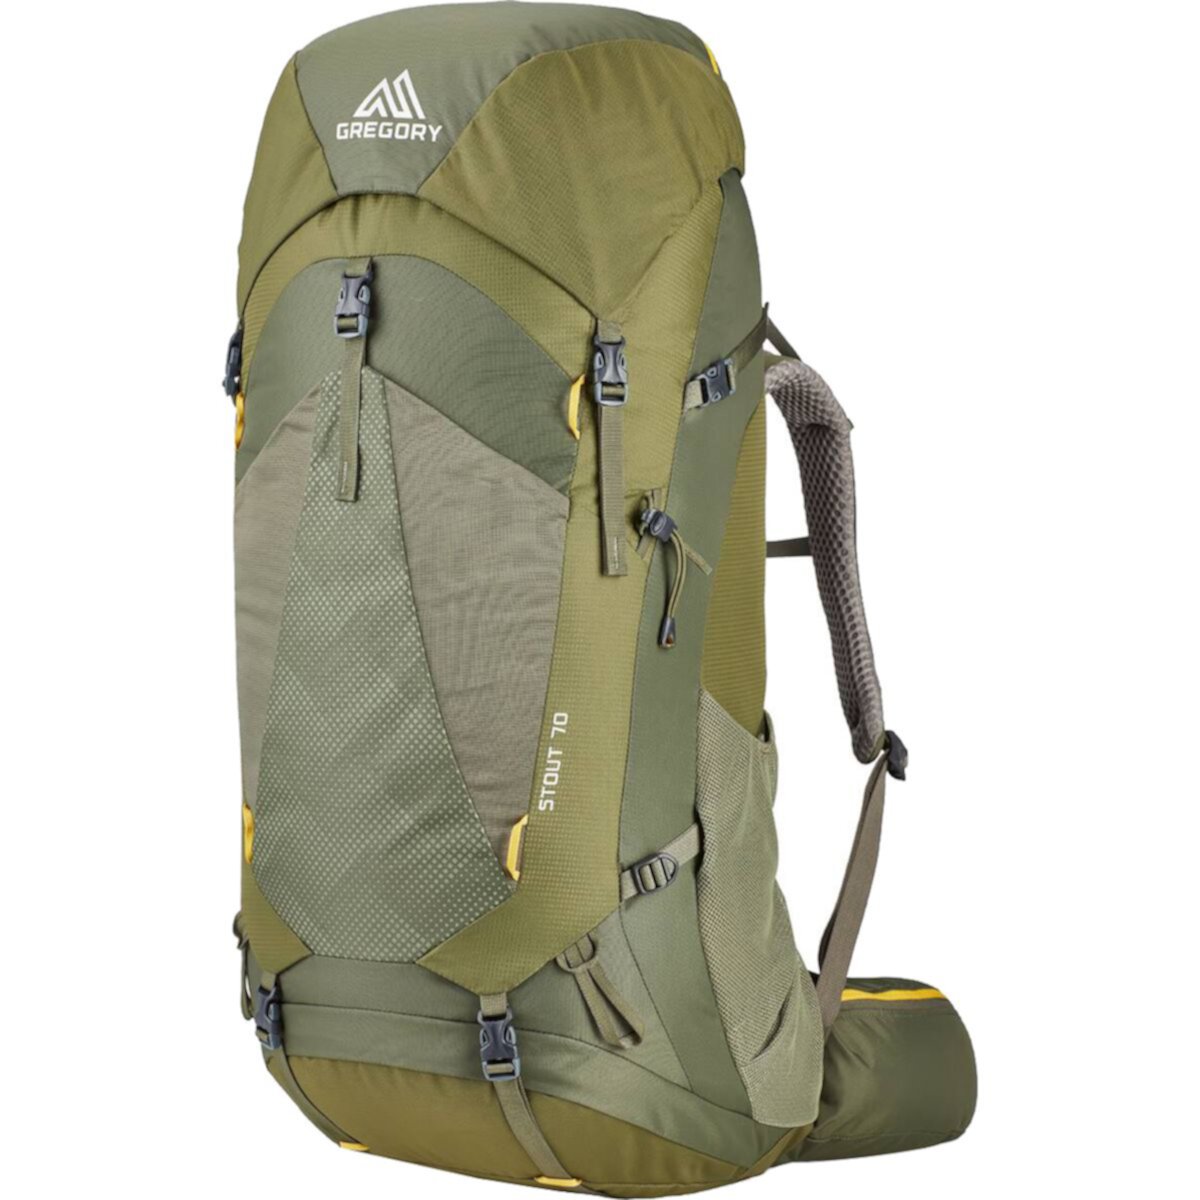 Stout 70L Backpack Gregory